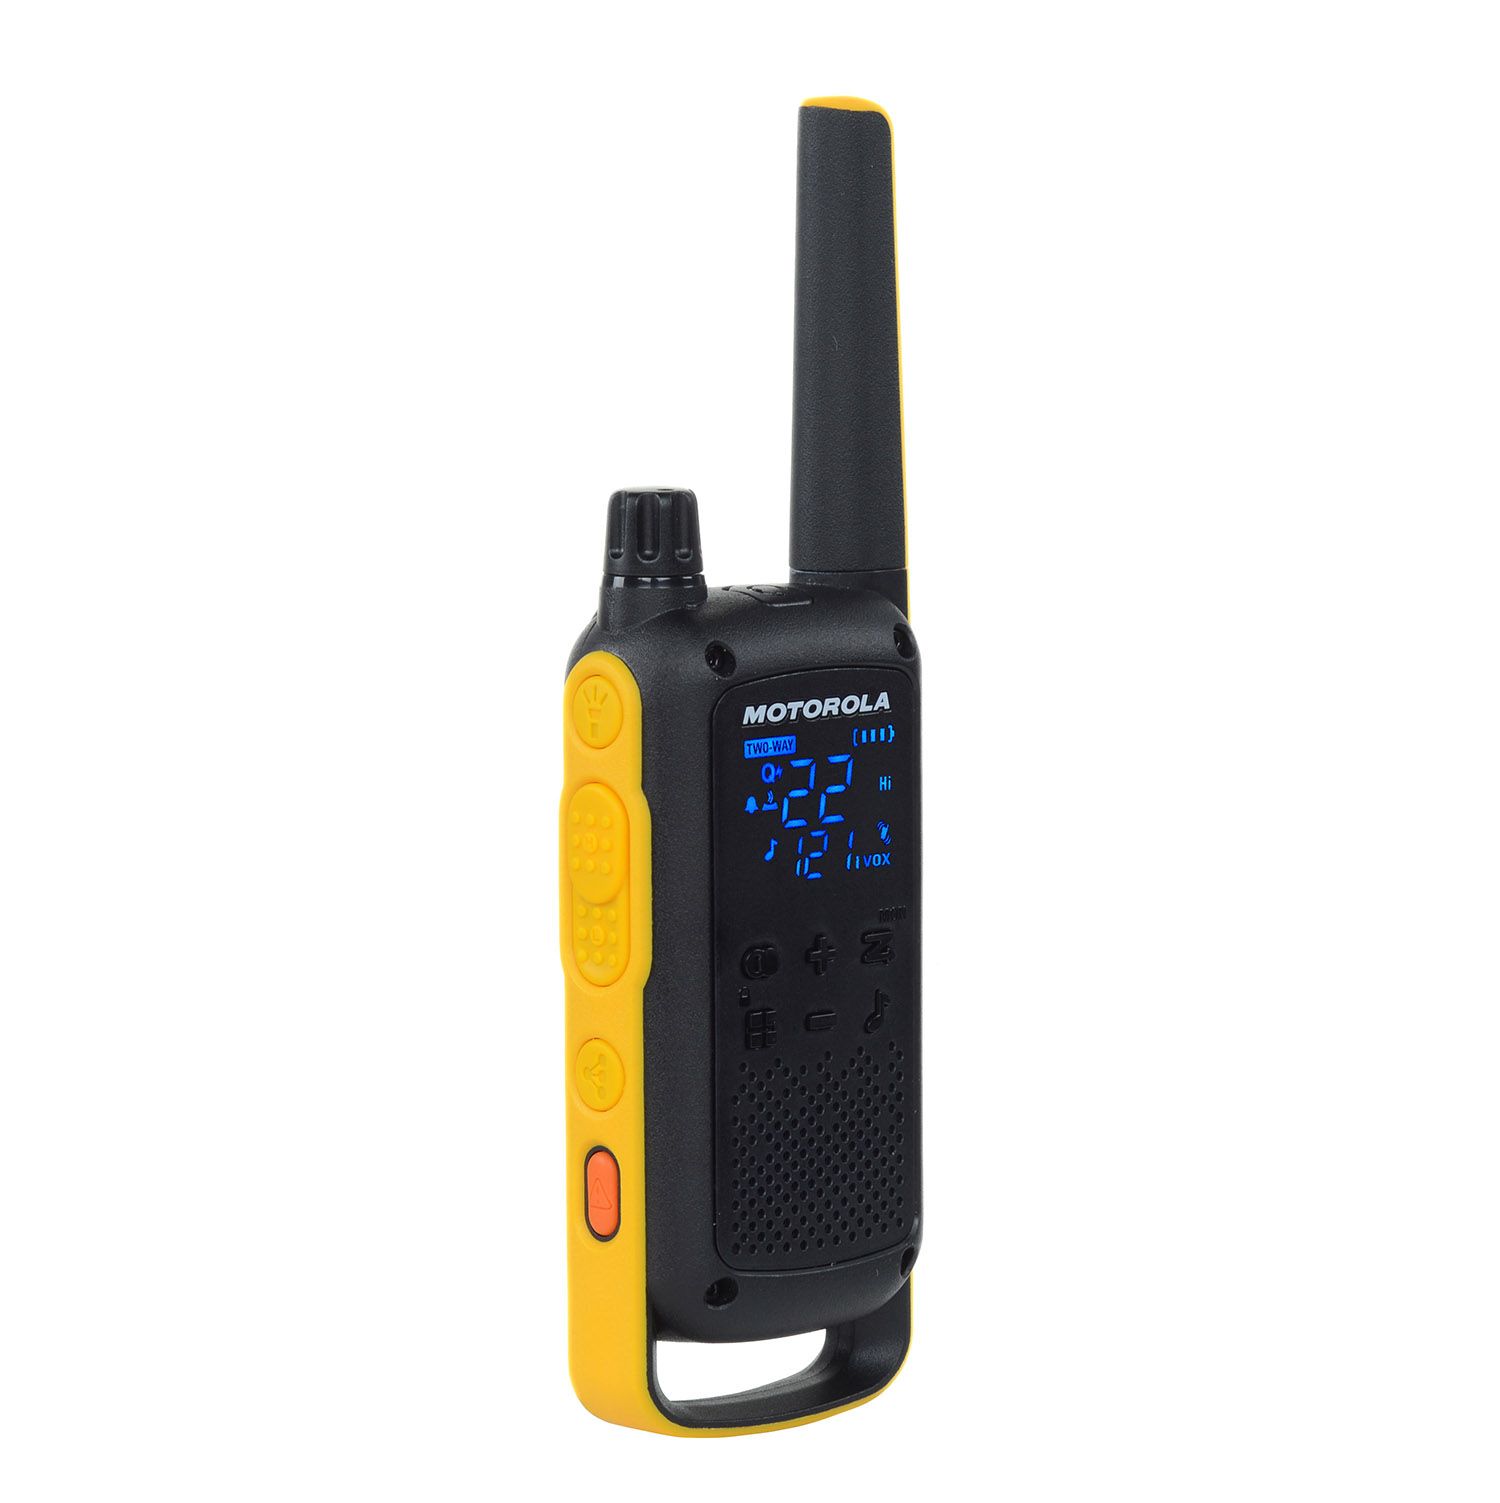 yellow walkie talkie left side buttons